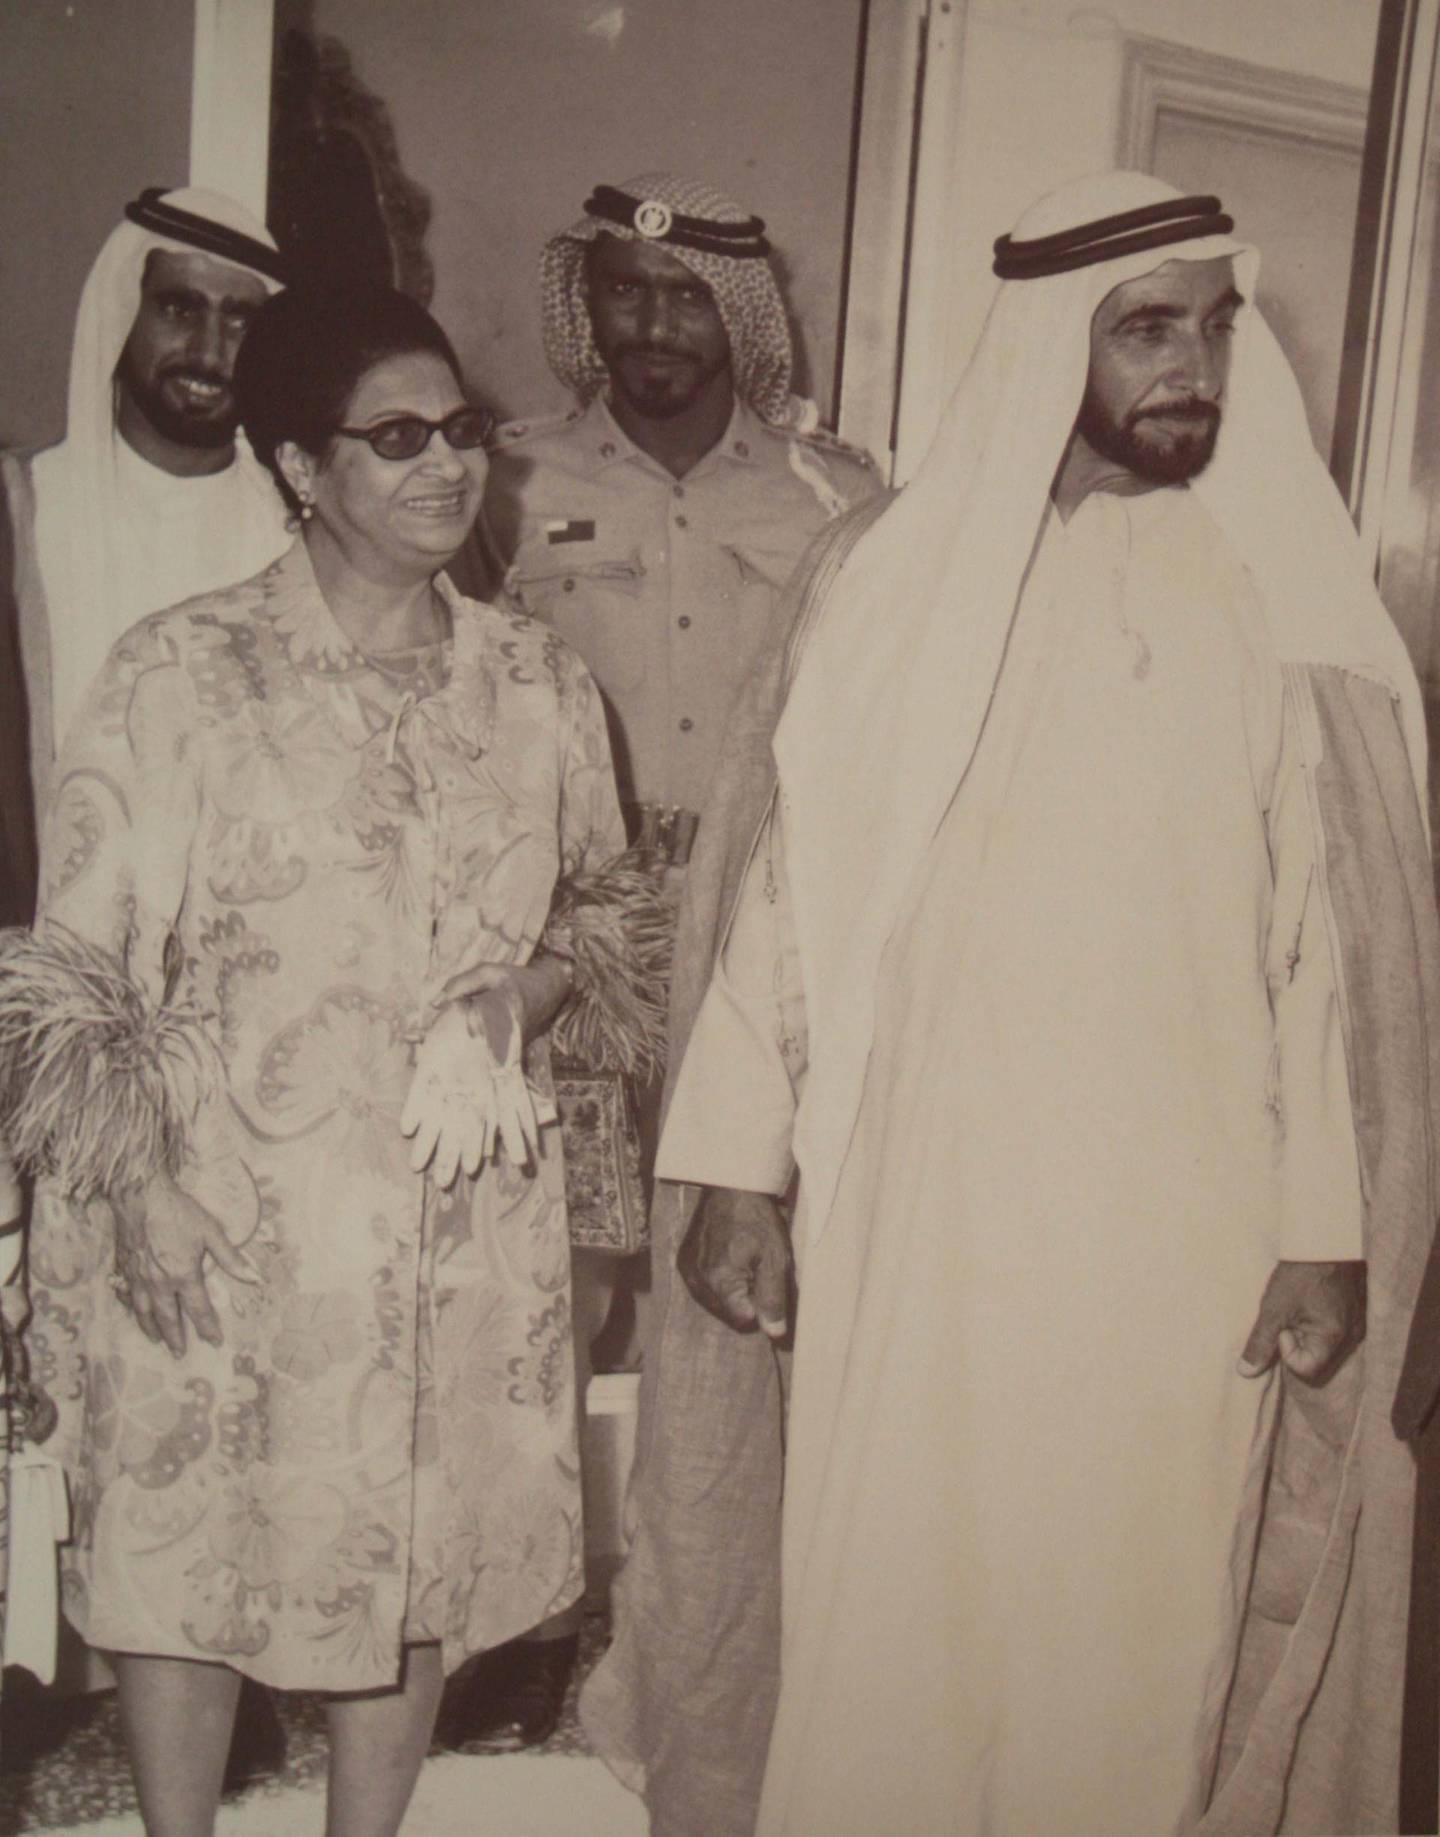 DUBAI.29th April 2008.Umm Kulthum  antique Indian pearl necklace at the Christie's Dubai Sale held at the Emirates Towers hotel. .Stephen Lock  /  The National. COPY PIC: Umm Kulthum with Sheikh Zayed (who gave her the necklace) taken in the early 1970's *** Local Caption *** SL-necklace-006.jpg